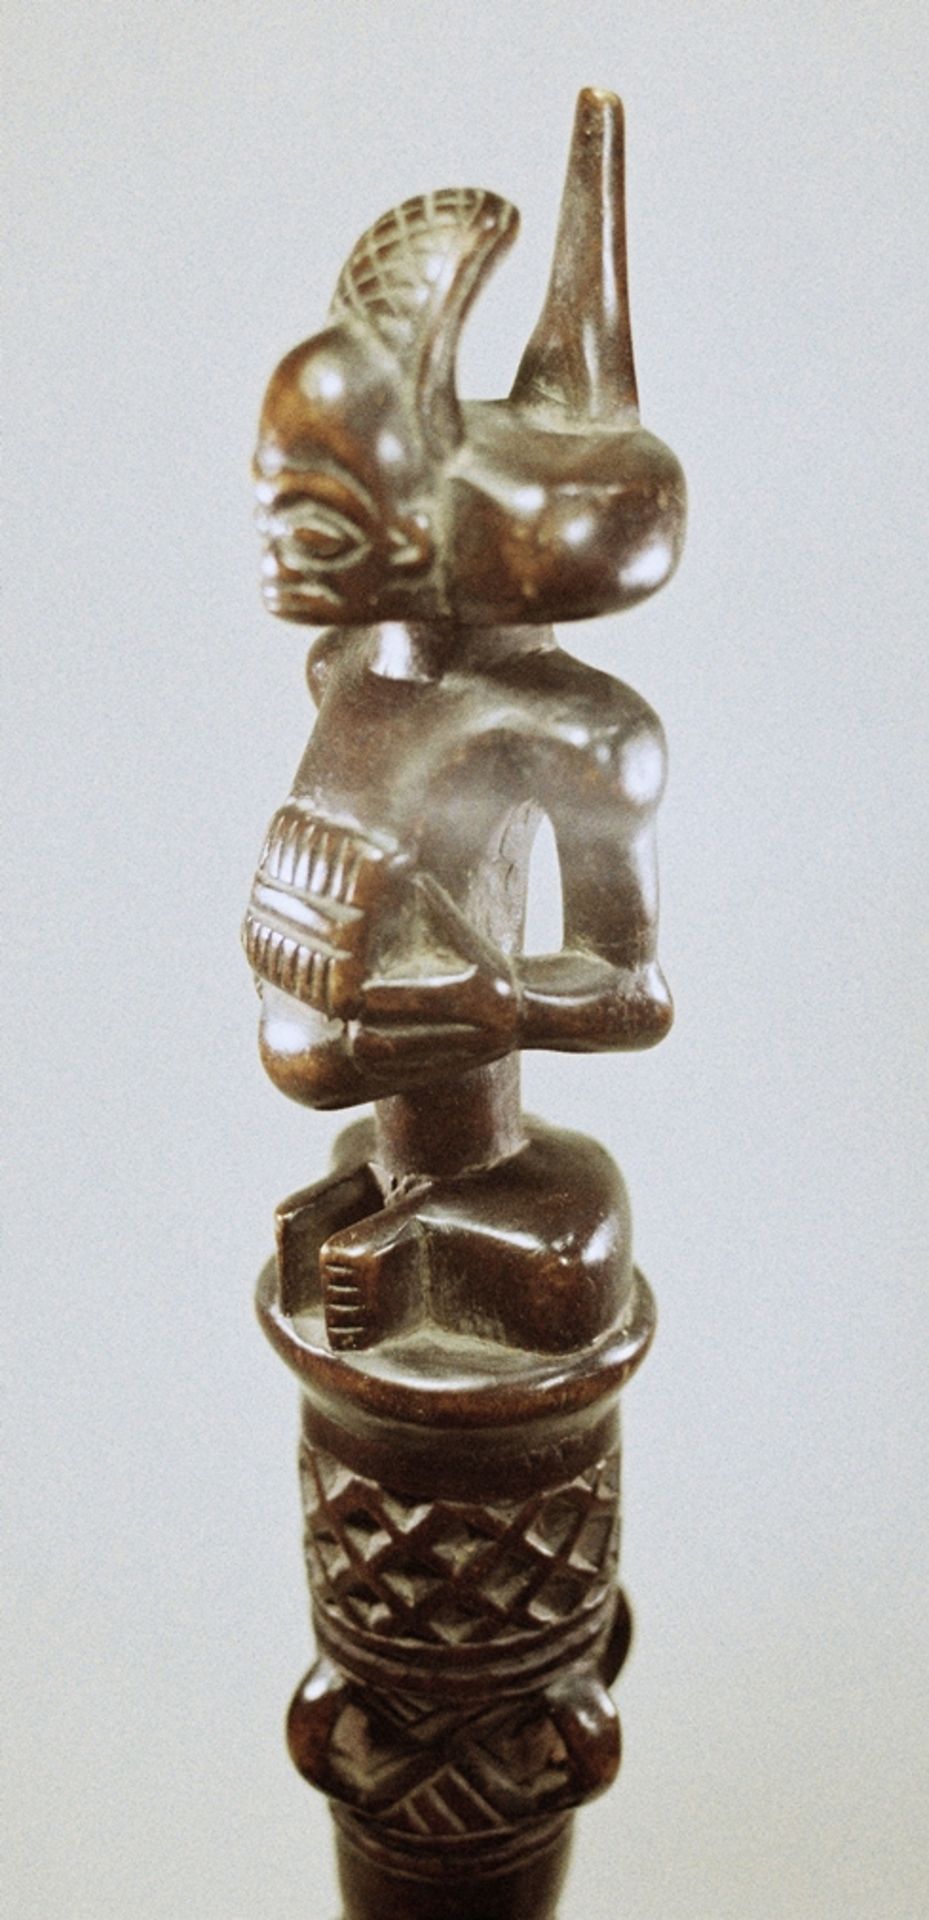 Sceptre of a notable of the Chokwe, Angola - Image 3 of 3